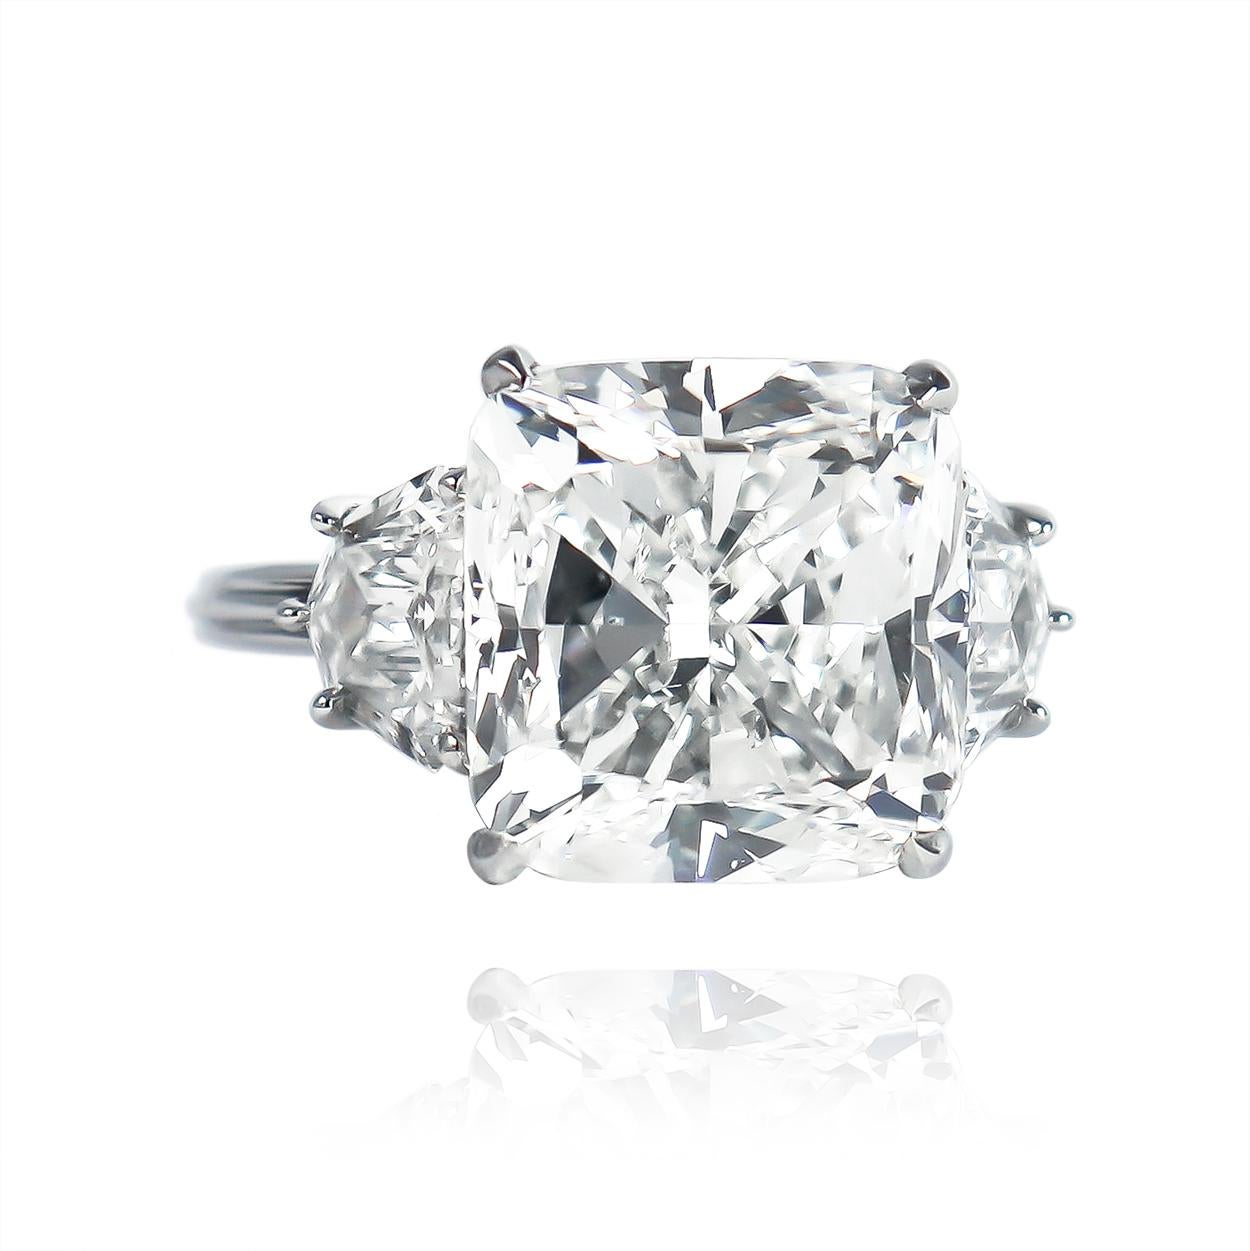 This J. Birnbach original features a 9.01 carat cushion modified brilliant cut diamond of H color and SI1 clarity... Fit for royalty, this stone is flanked by a pair of shield diamonds = 1.70 carat total weight. Beautifully cut and dispersive from